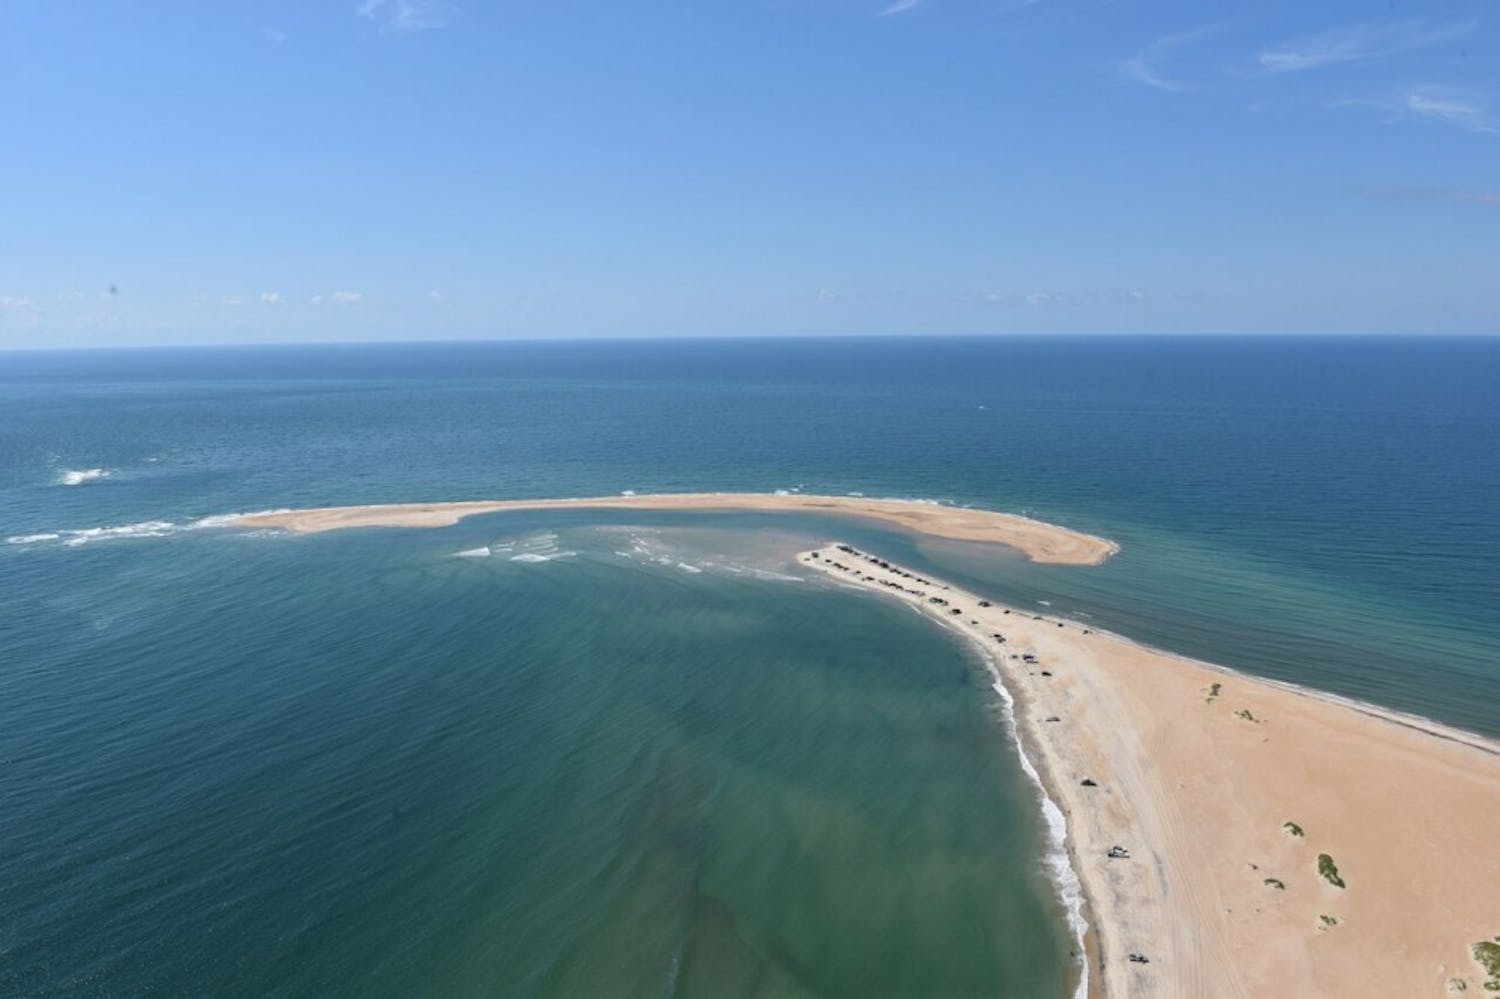 A new island started forming off the coast of Cape Point in the Outer Banks last fall. The sandbar, named Shelly Island, was found to be connected to Hatteras Island. Photo courtesy of outerbanks.org.